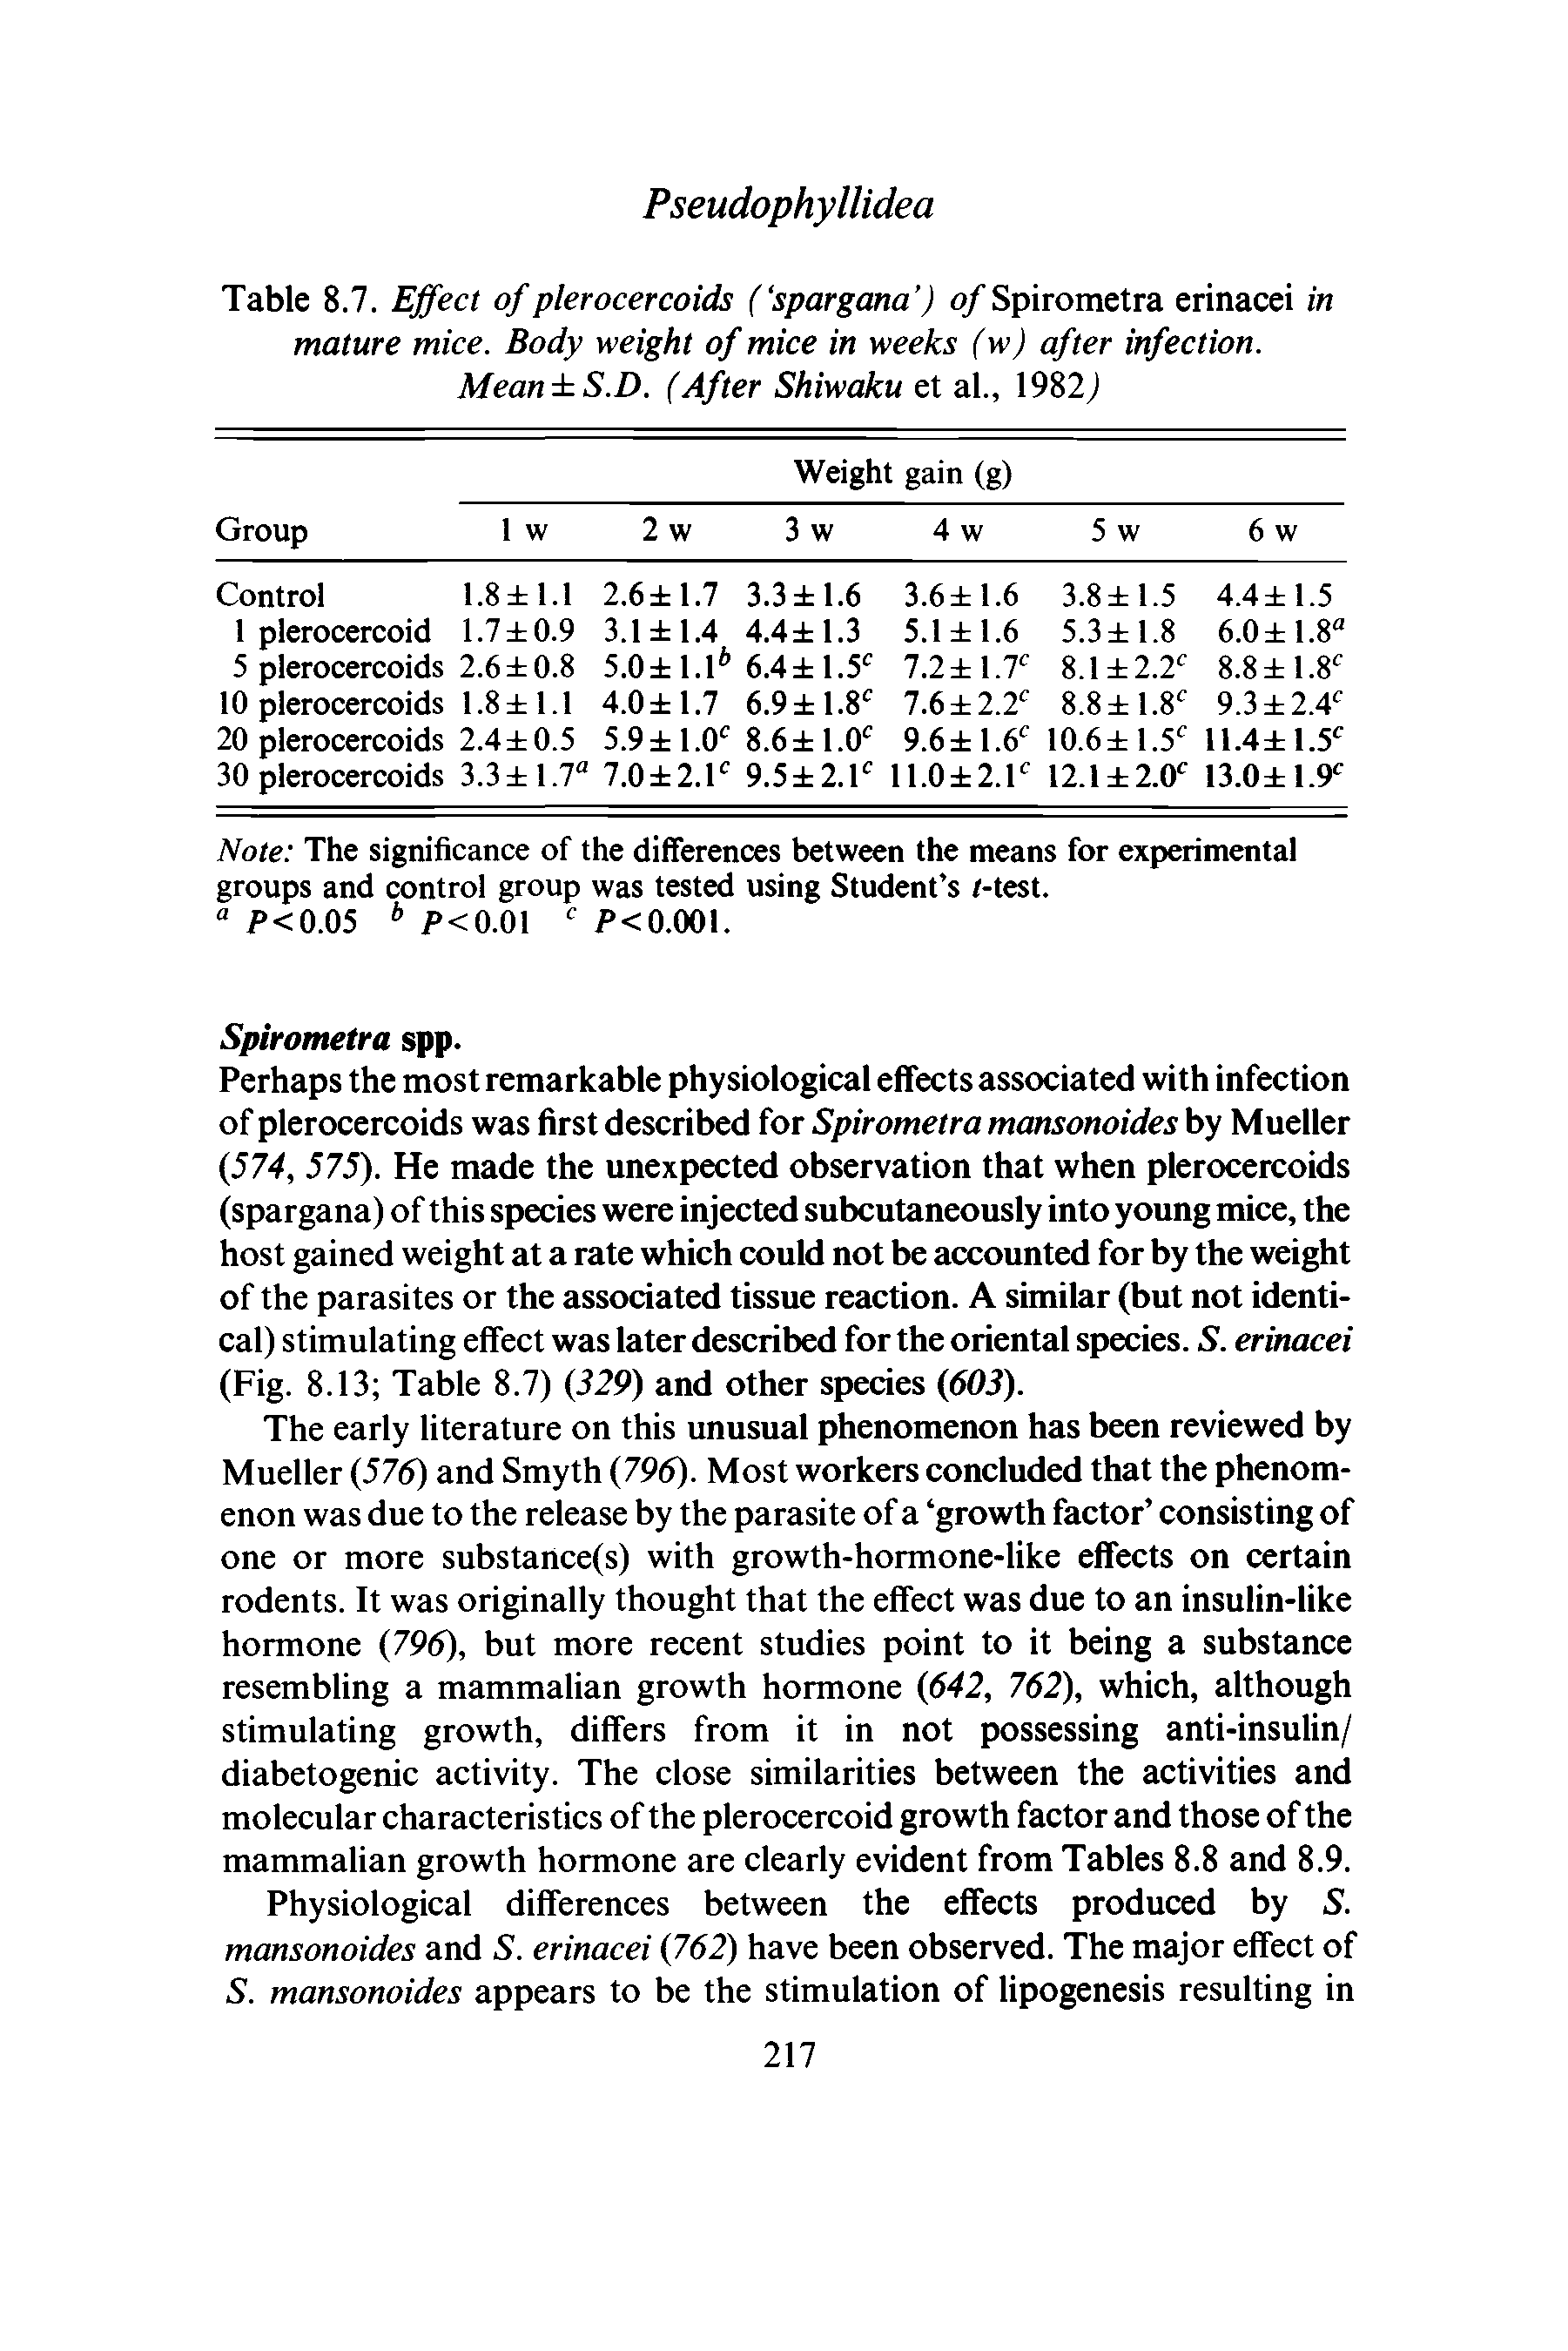 Table 8.7. Effect of plerocercoids ( spargana ) of Spirometra erinacei in mature mice. Body weight of mice in weeks (w) after infection. Mean S.D. (After Shiwaku et al., 19827...